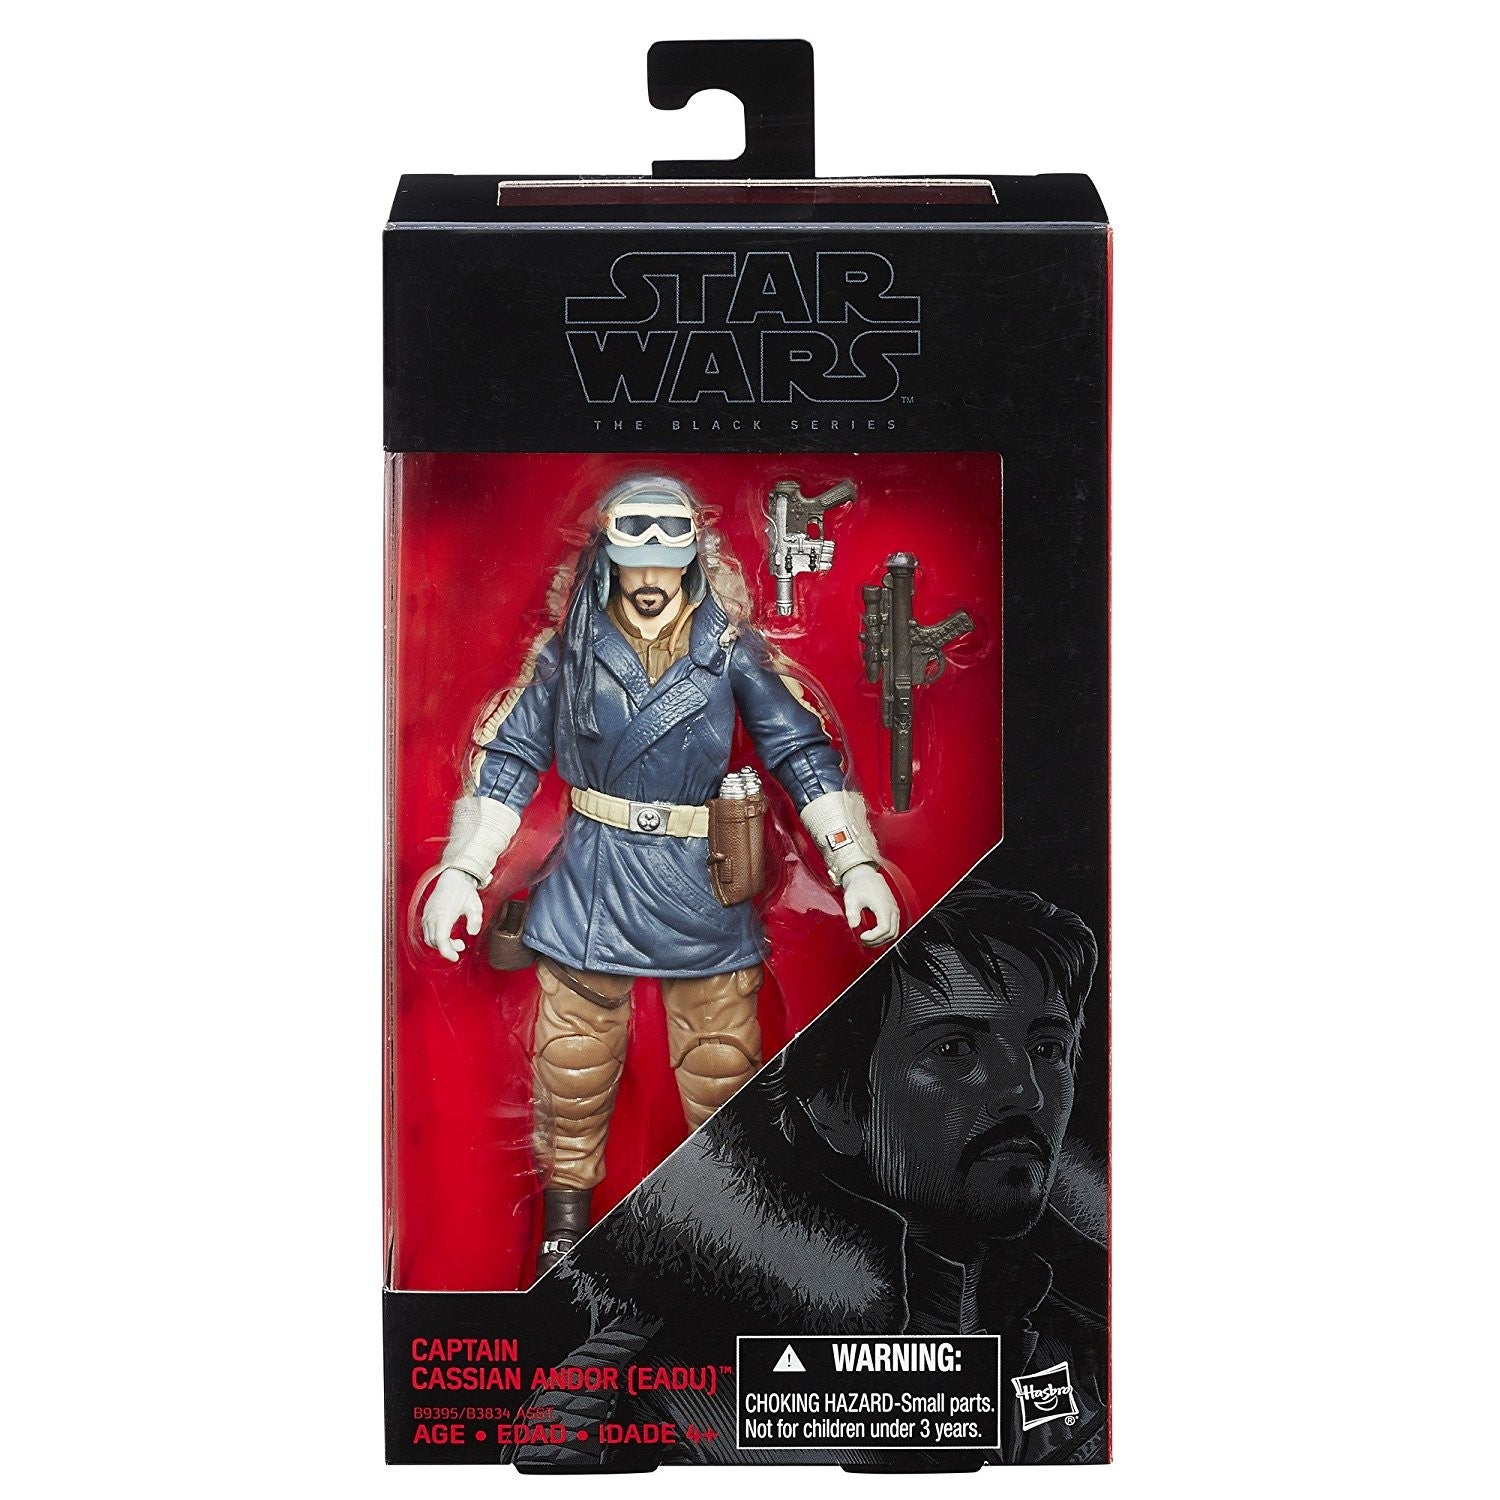 Star Wars Black Series 6" Captain Cassian Andor Eadu from Rogue One #23